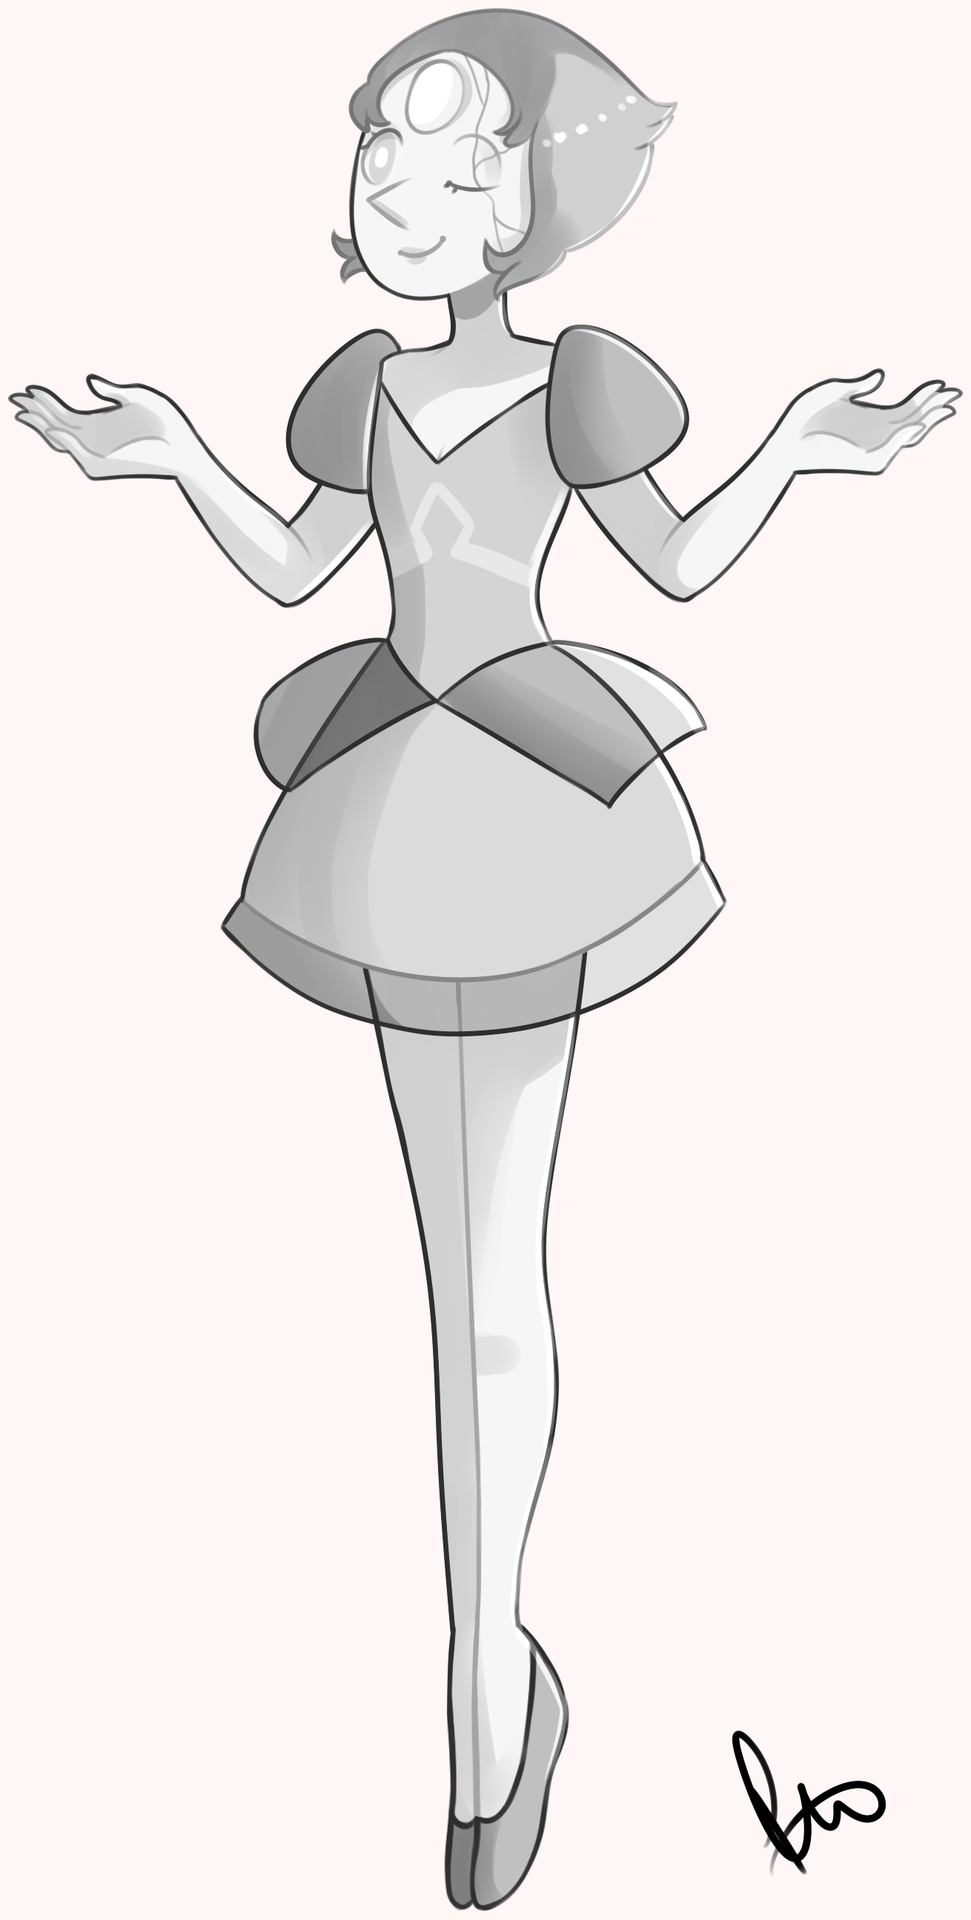 i love the theory that WD and PD switched pearls, so how about a role-swap?